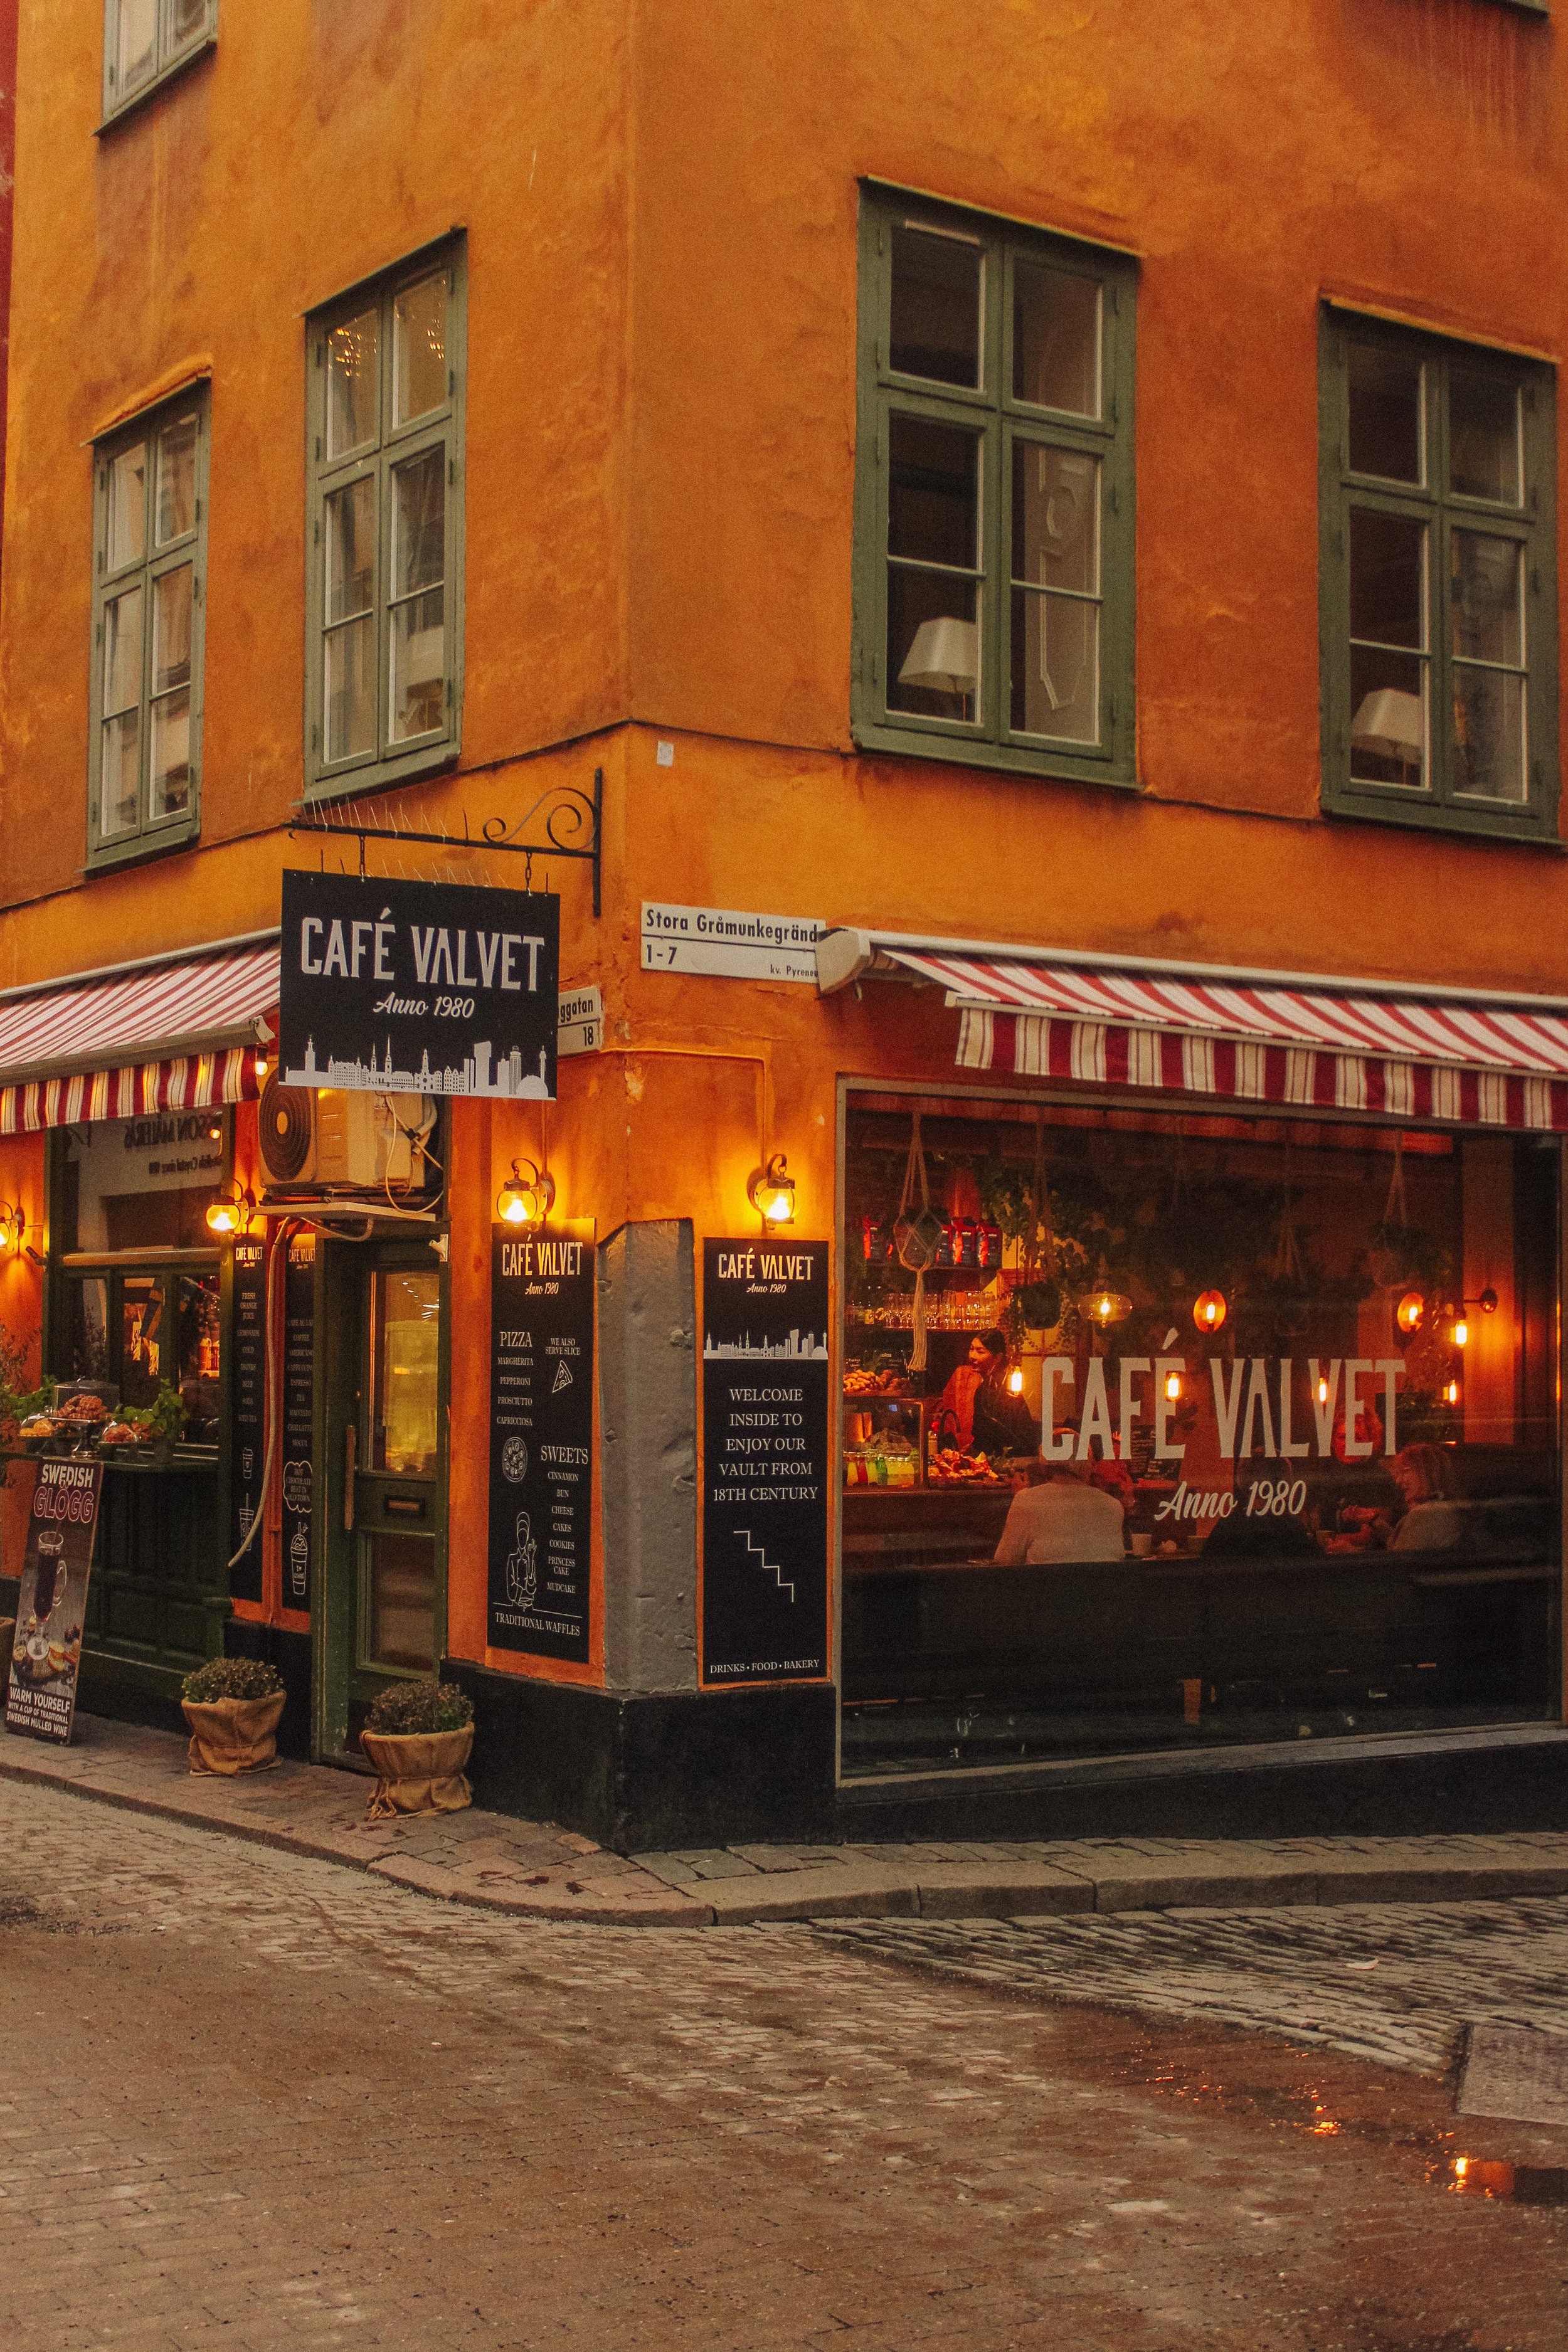 Festive things to do this Christmas in Stockholm